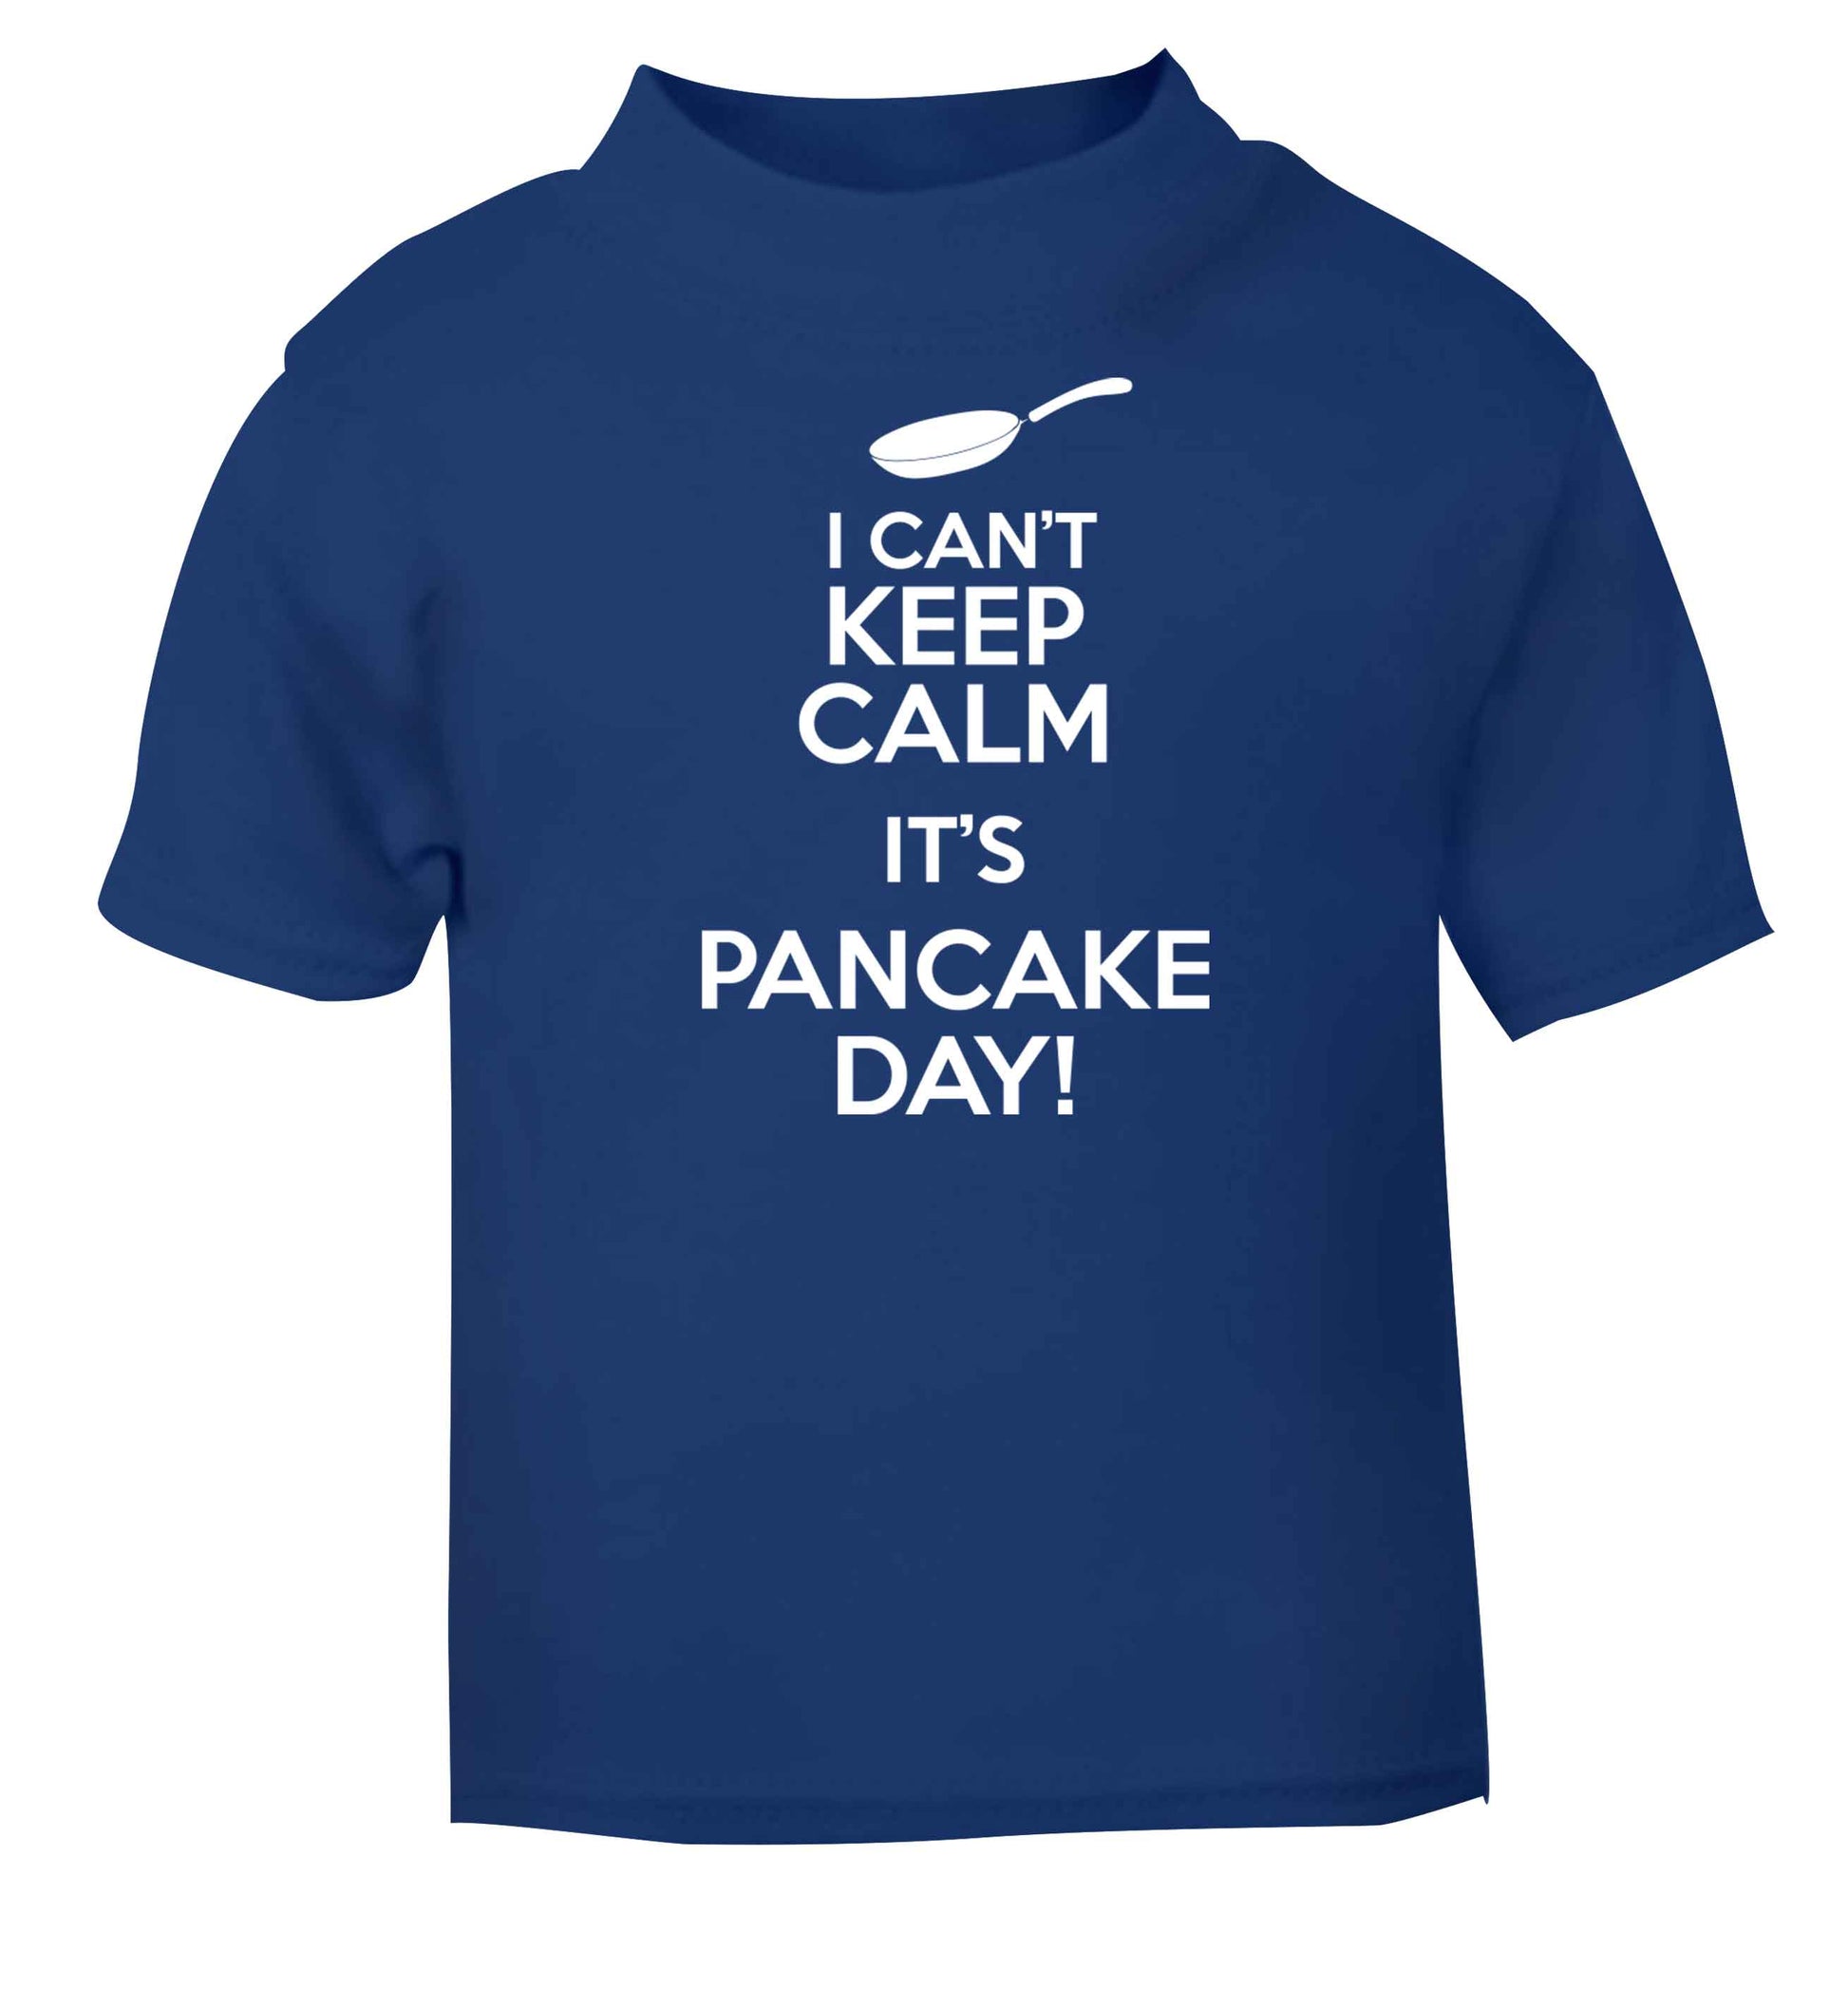 I can't keep calm it's pancake day! blue baby toddler Tshirt 2 Years